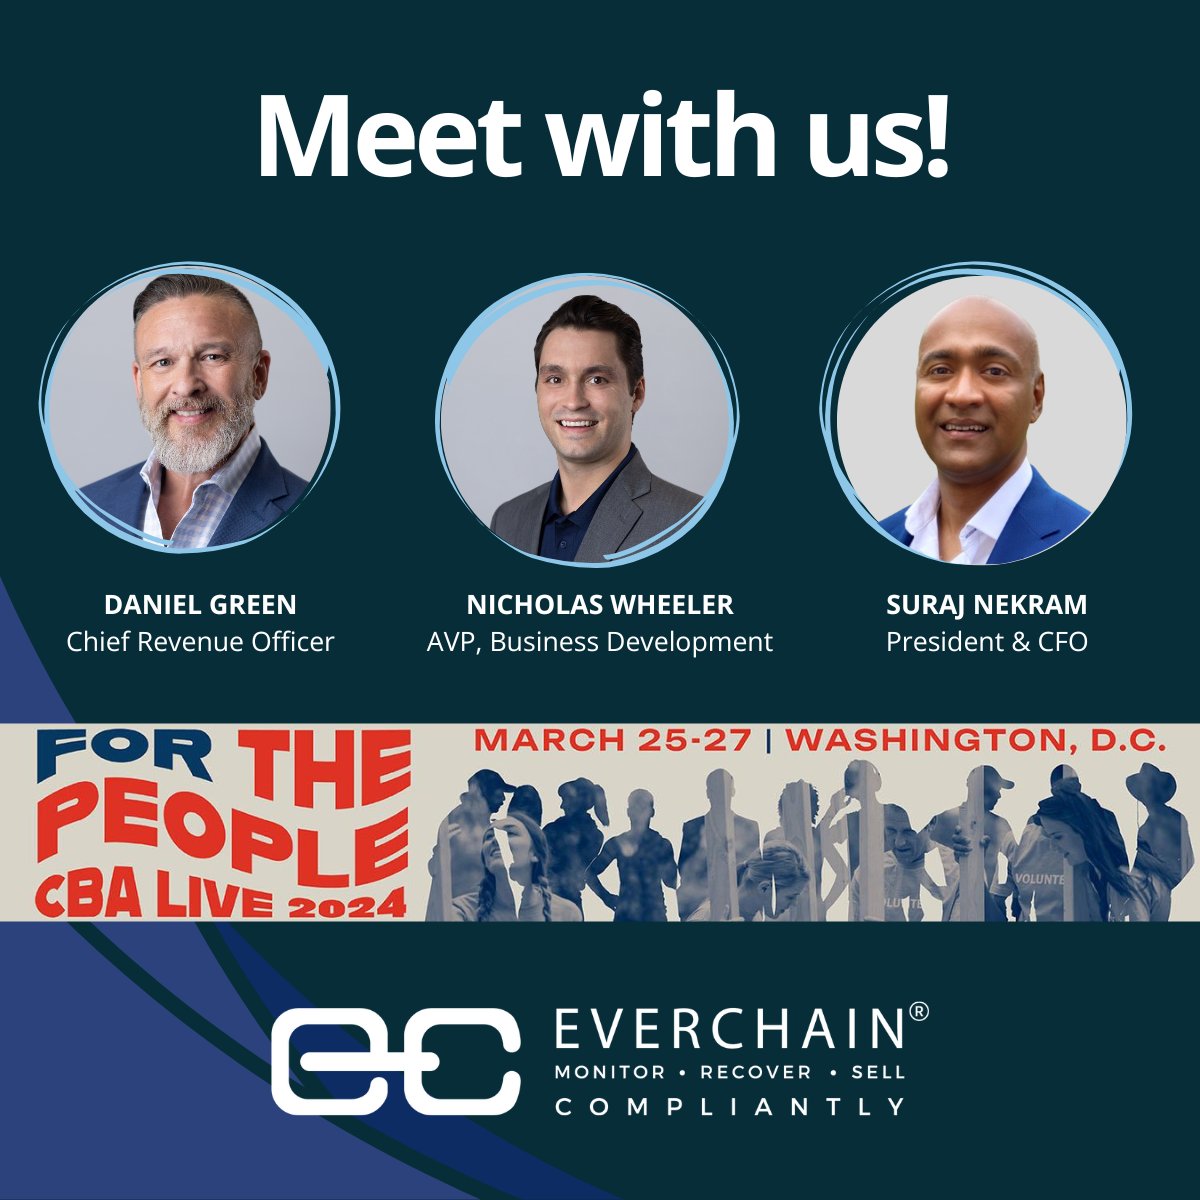 EverChain's dynamic team will be at #CBALive2024 in Washington, D.C. next week. Don't miss the chance to arrange a meeting with us. Visit hubs.la/Q02qjBQx0 to schedule an appointment.